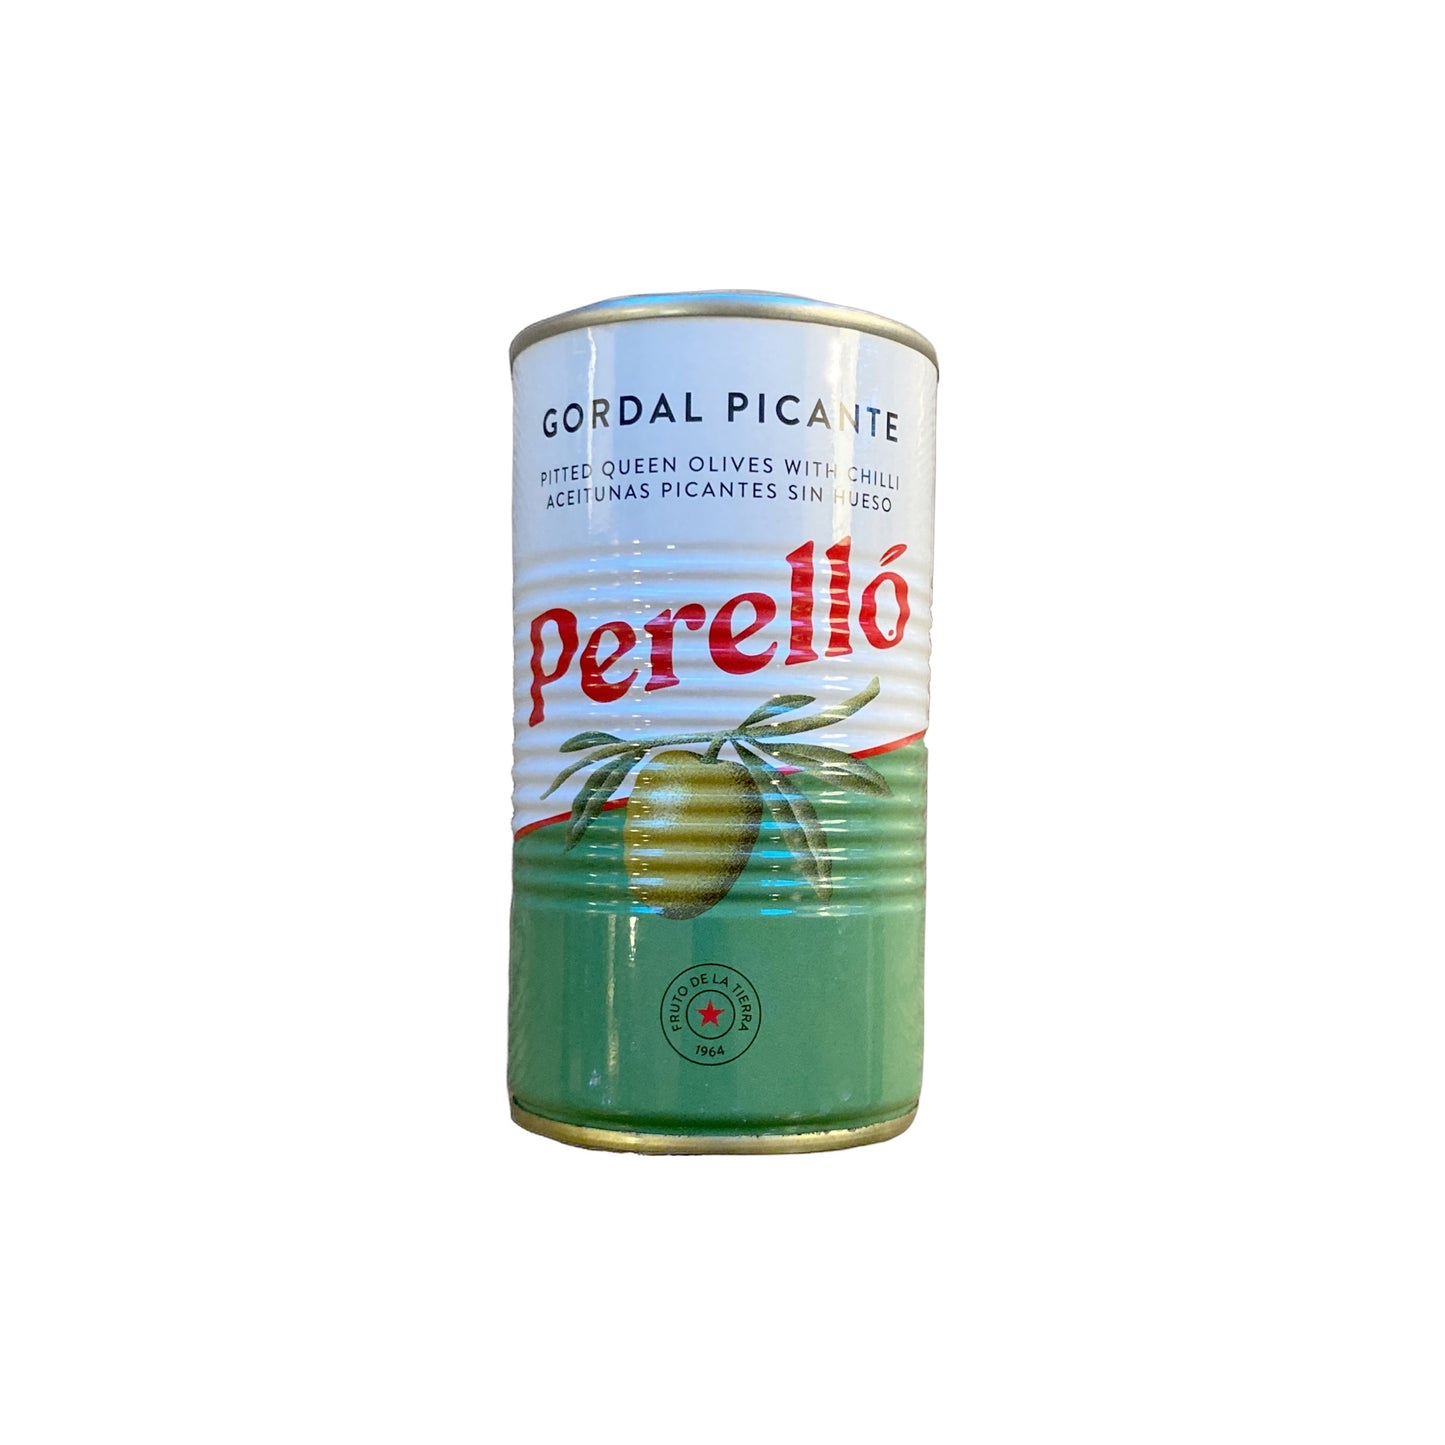 Perello Gordal Picante Tin 350g (drained weight 150g)